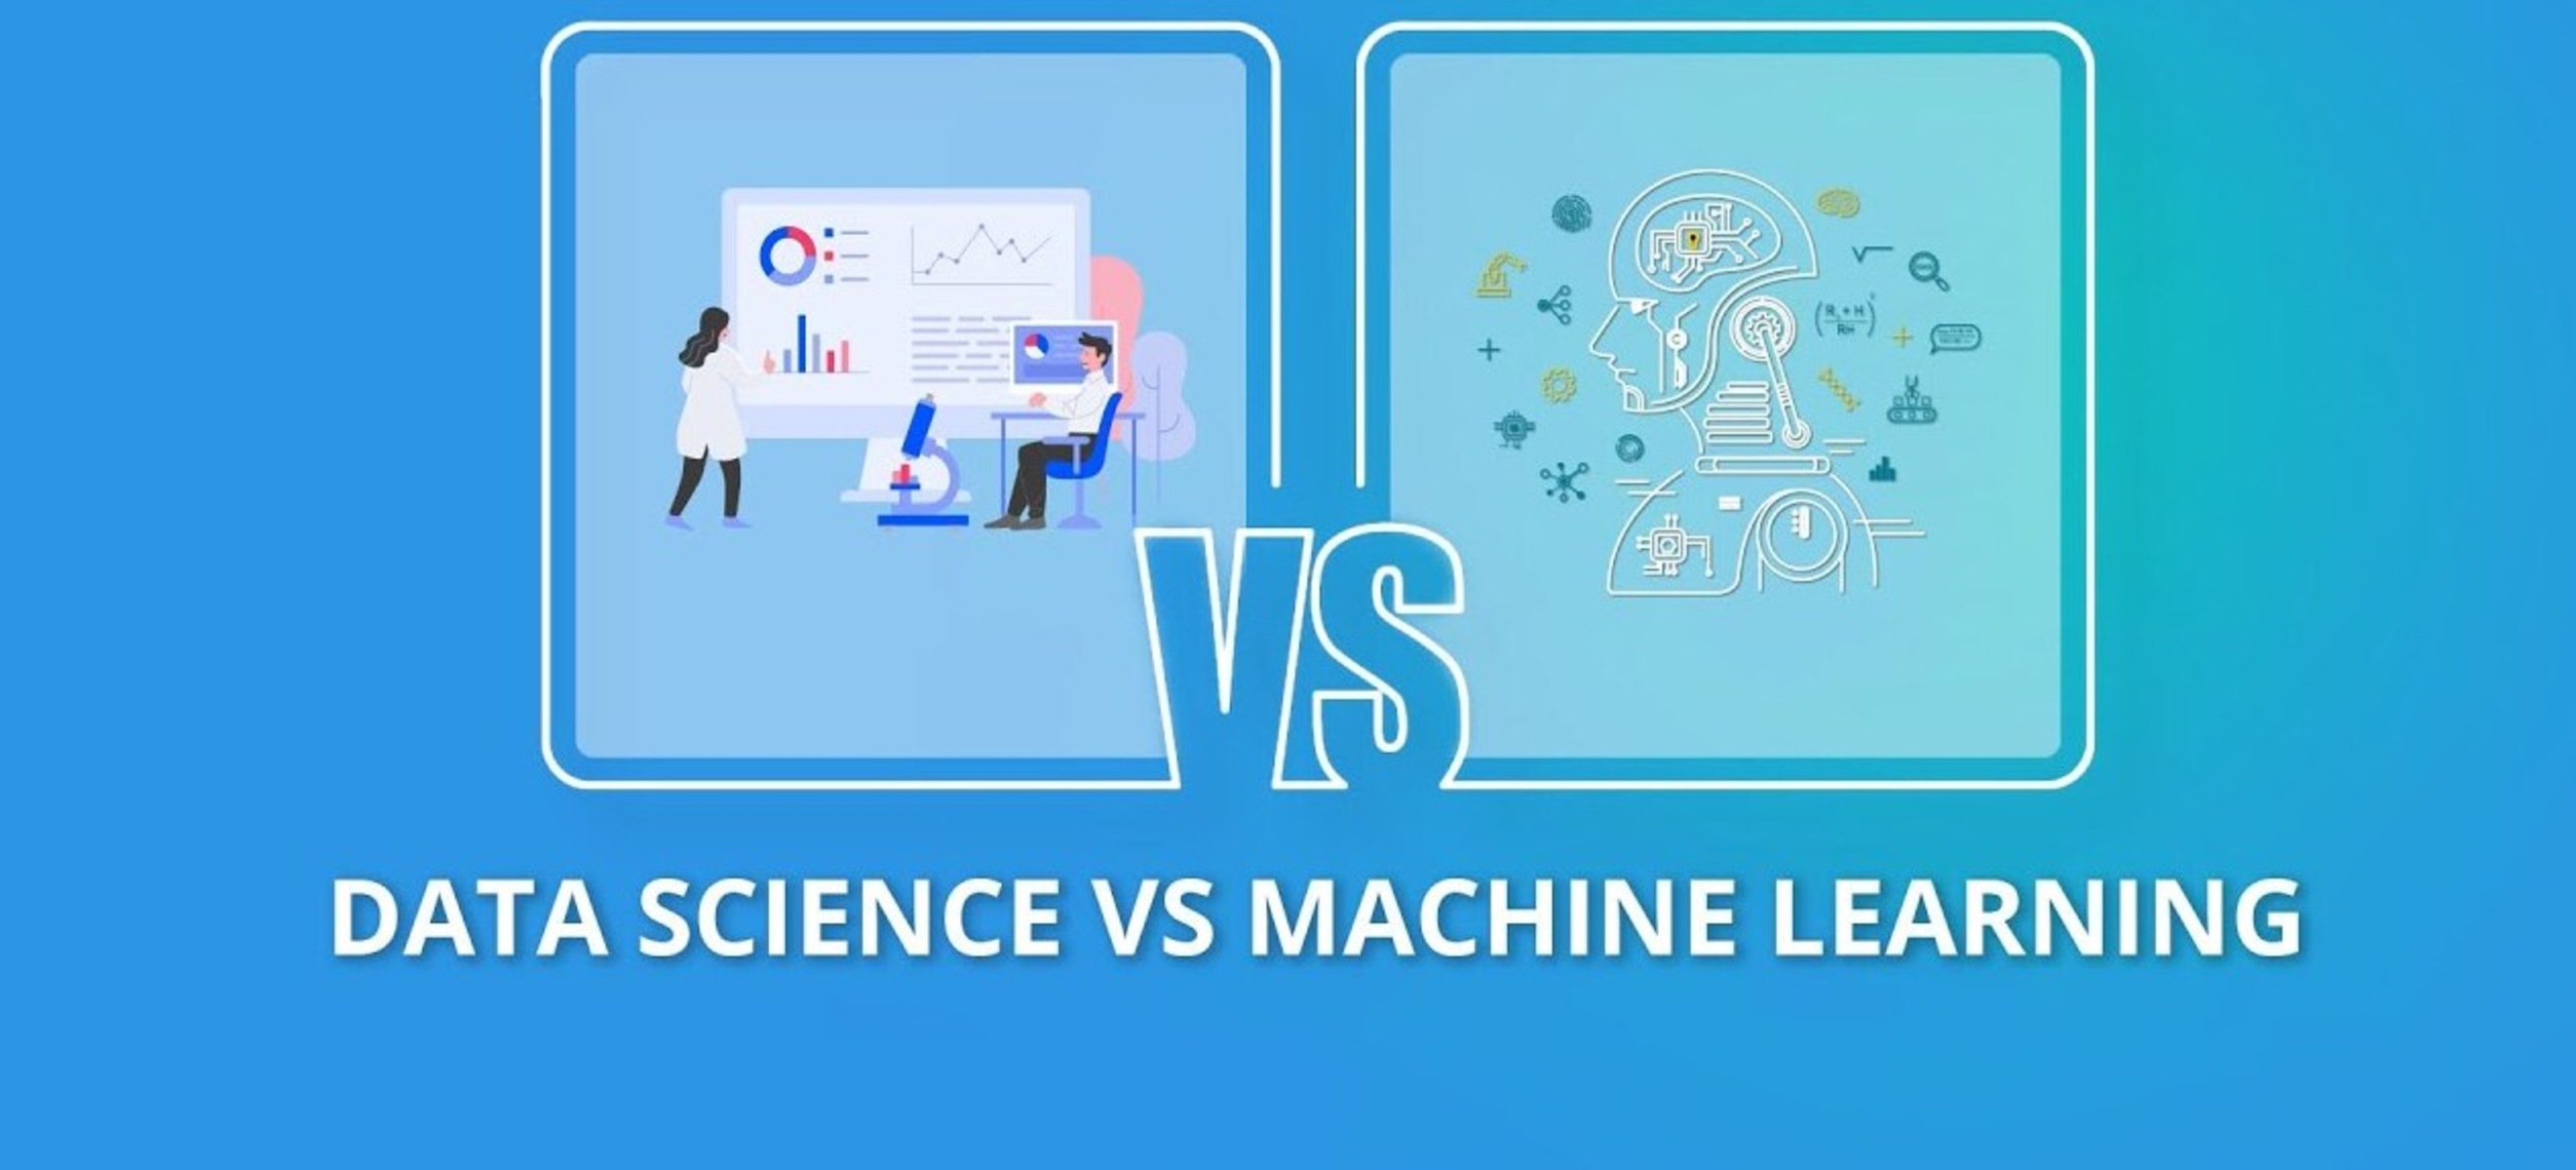 What Is The Difference Between Data Science And Machine Learning